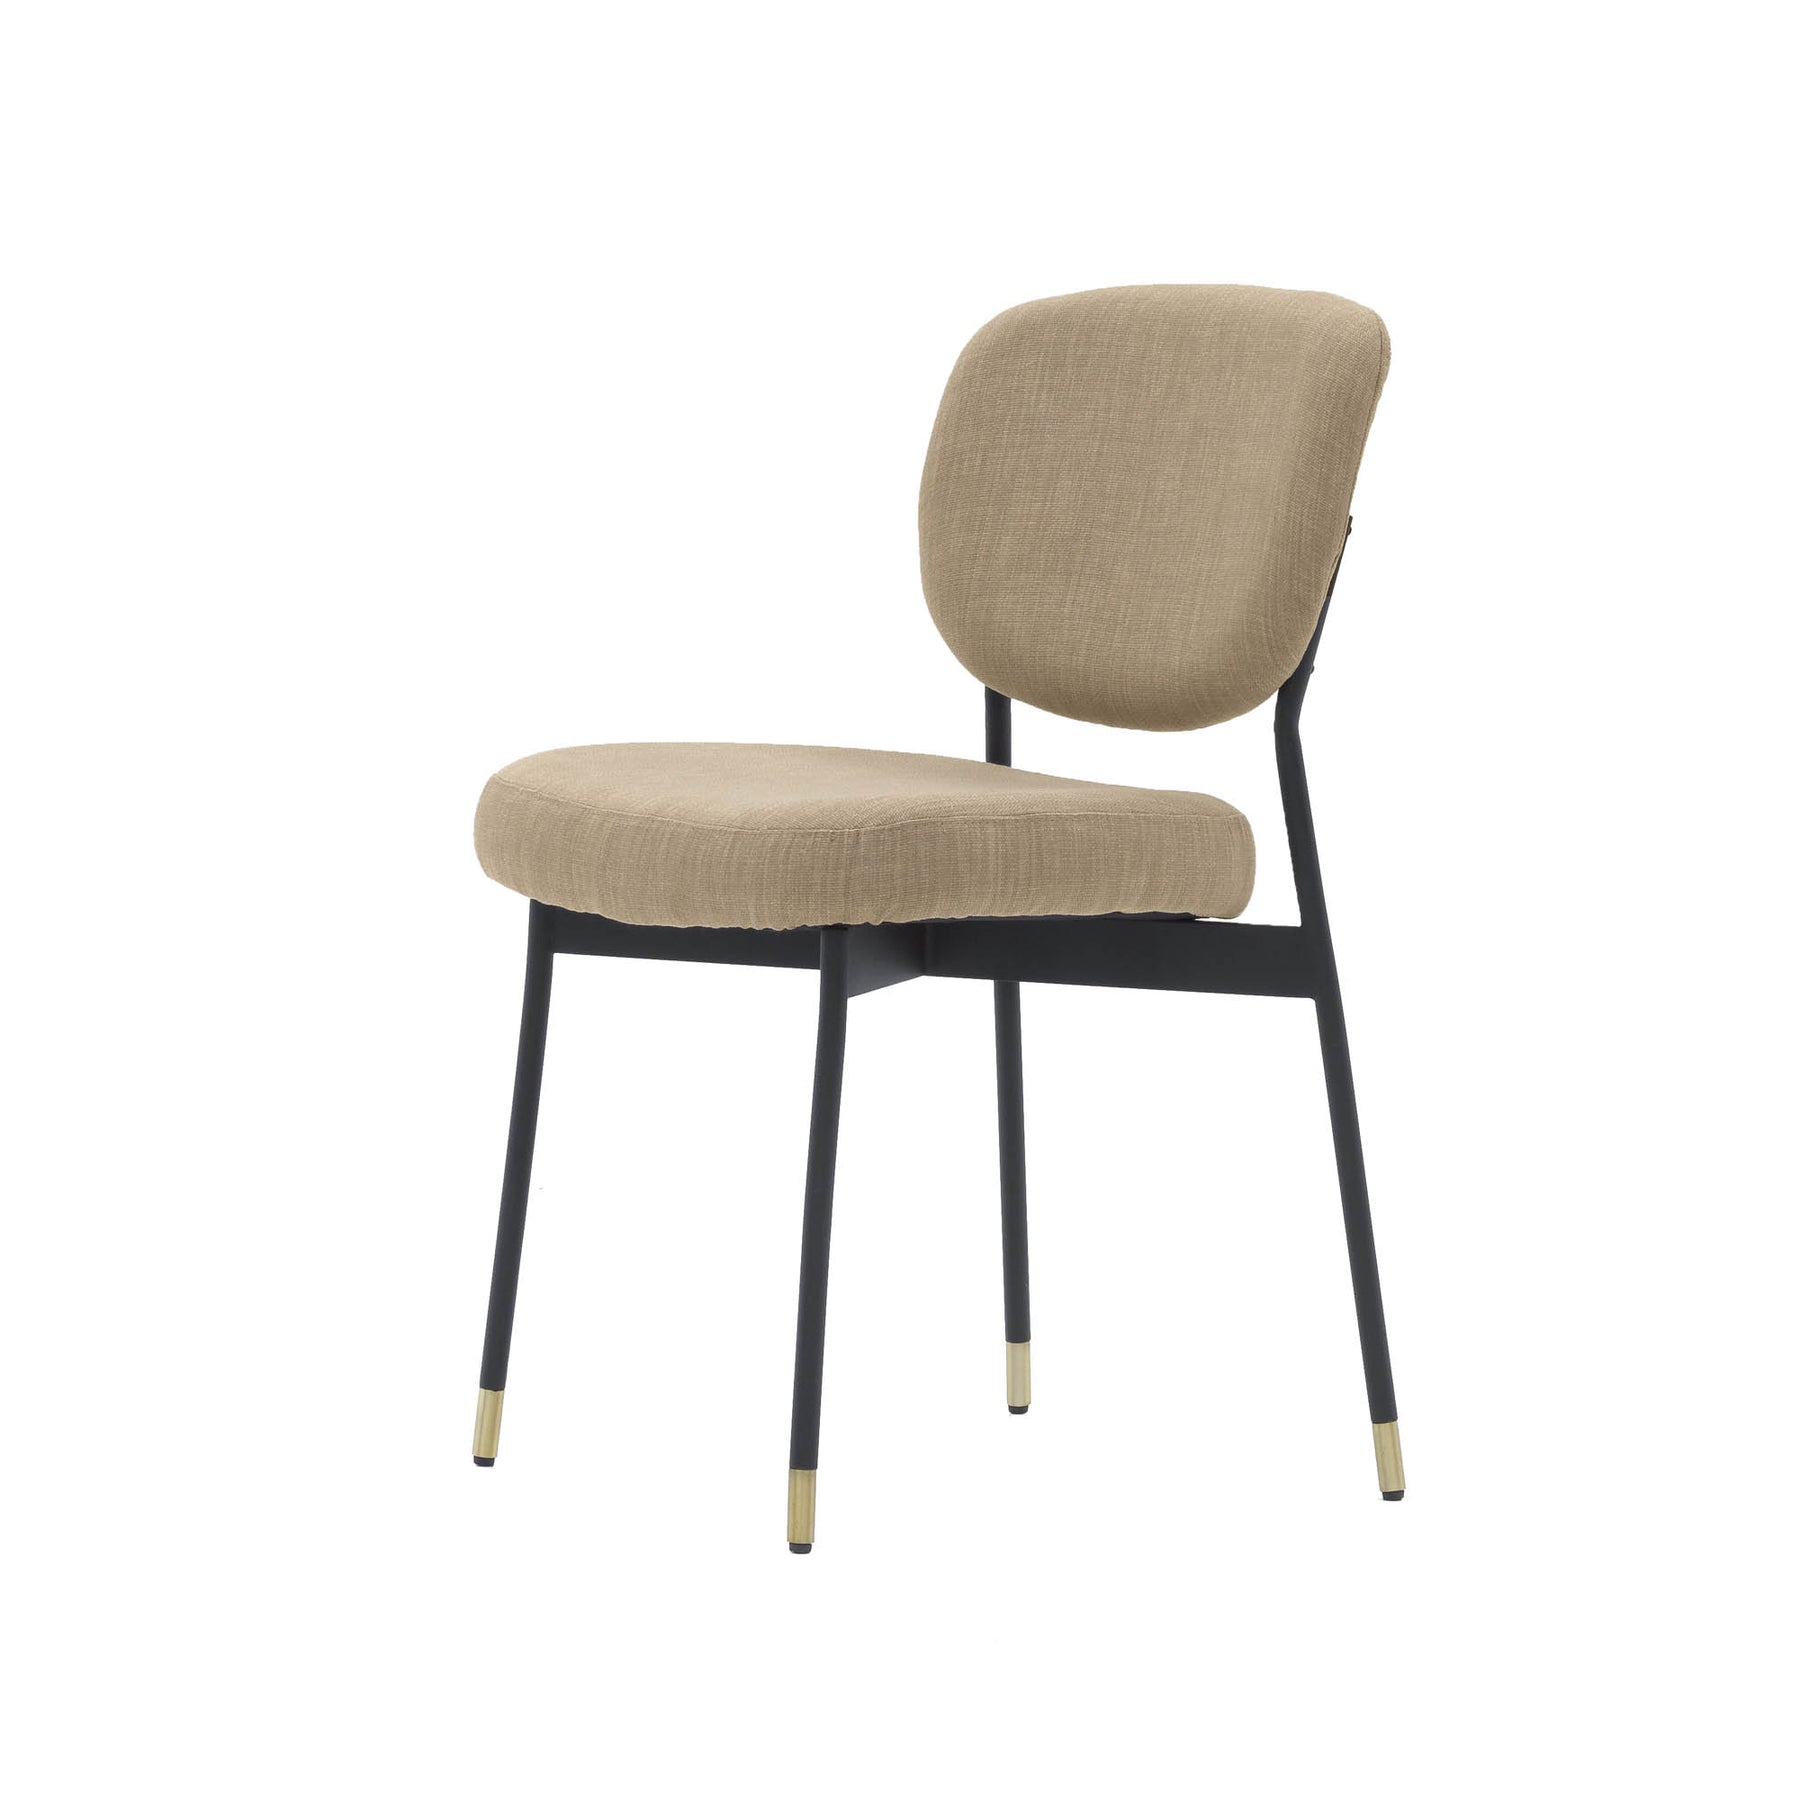 LH Imports, Redge Dining Chair - Linen